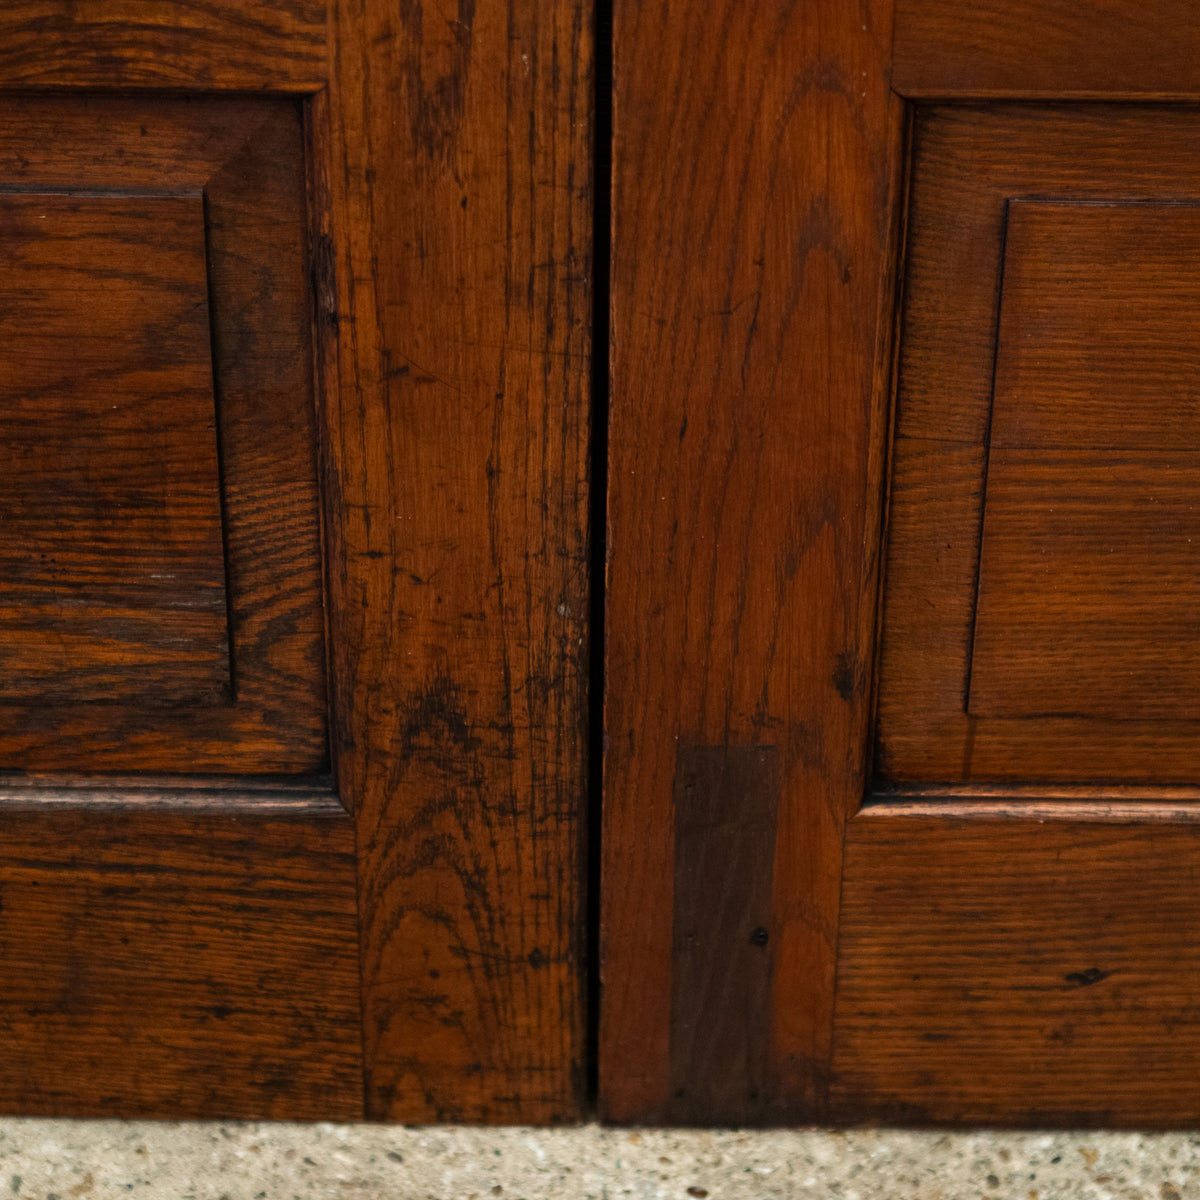 Large Antique Double Doors | Solid Oak Doors with Glazed Panels | The Architectural Forum